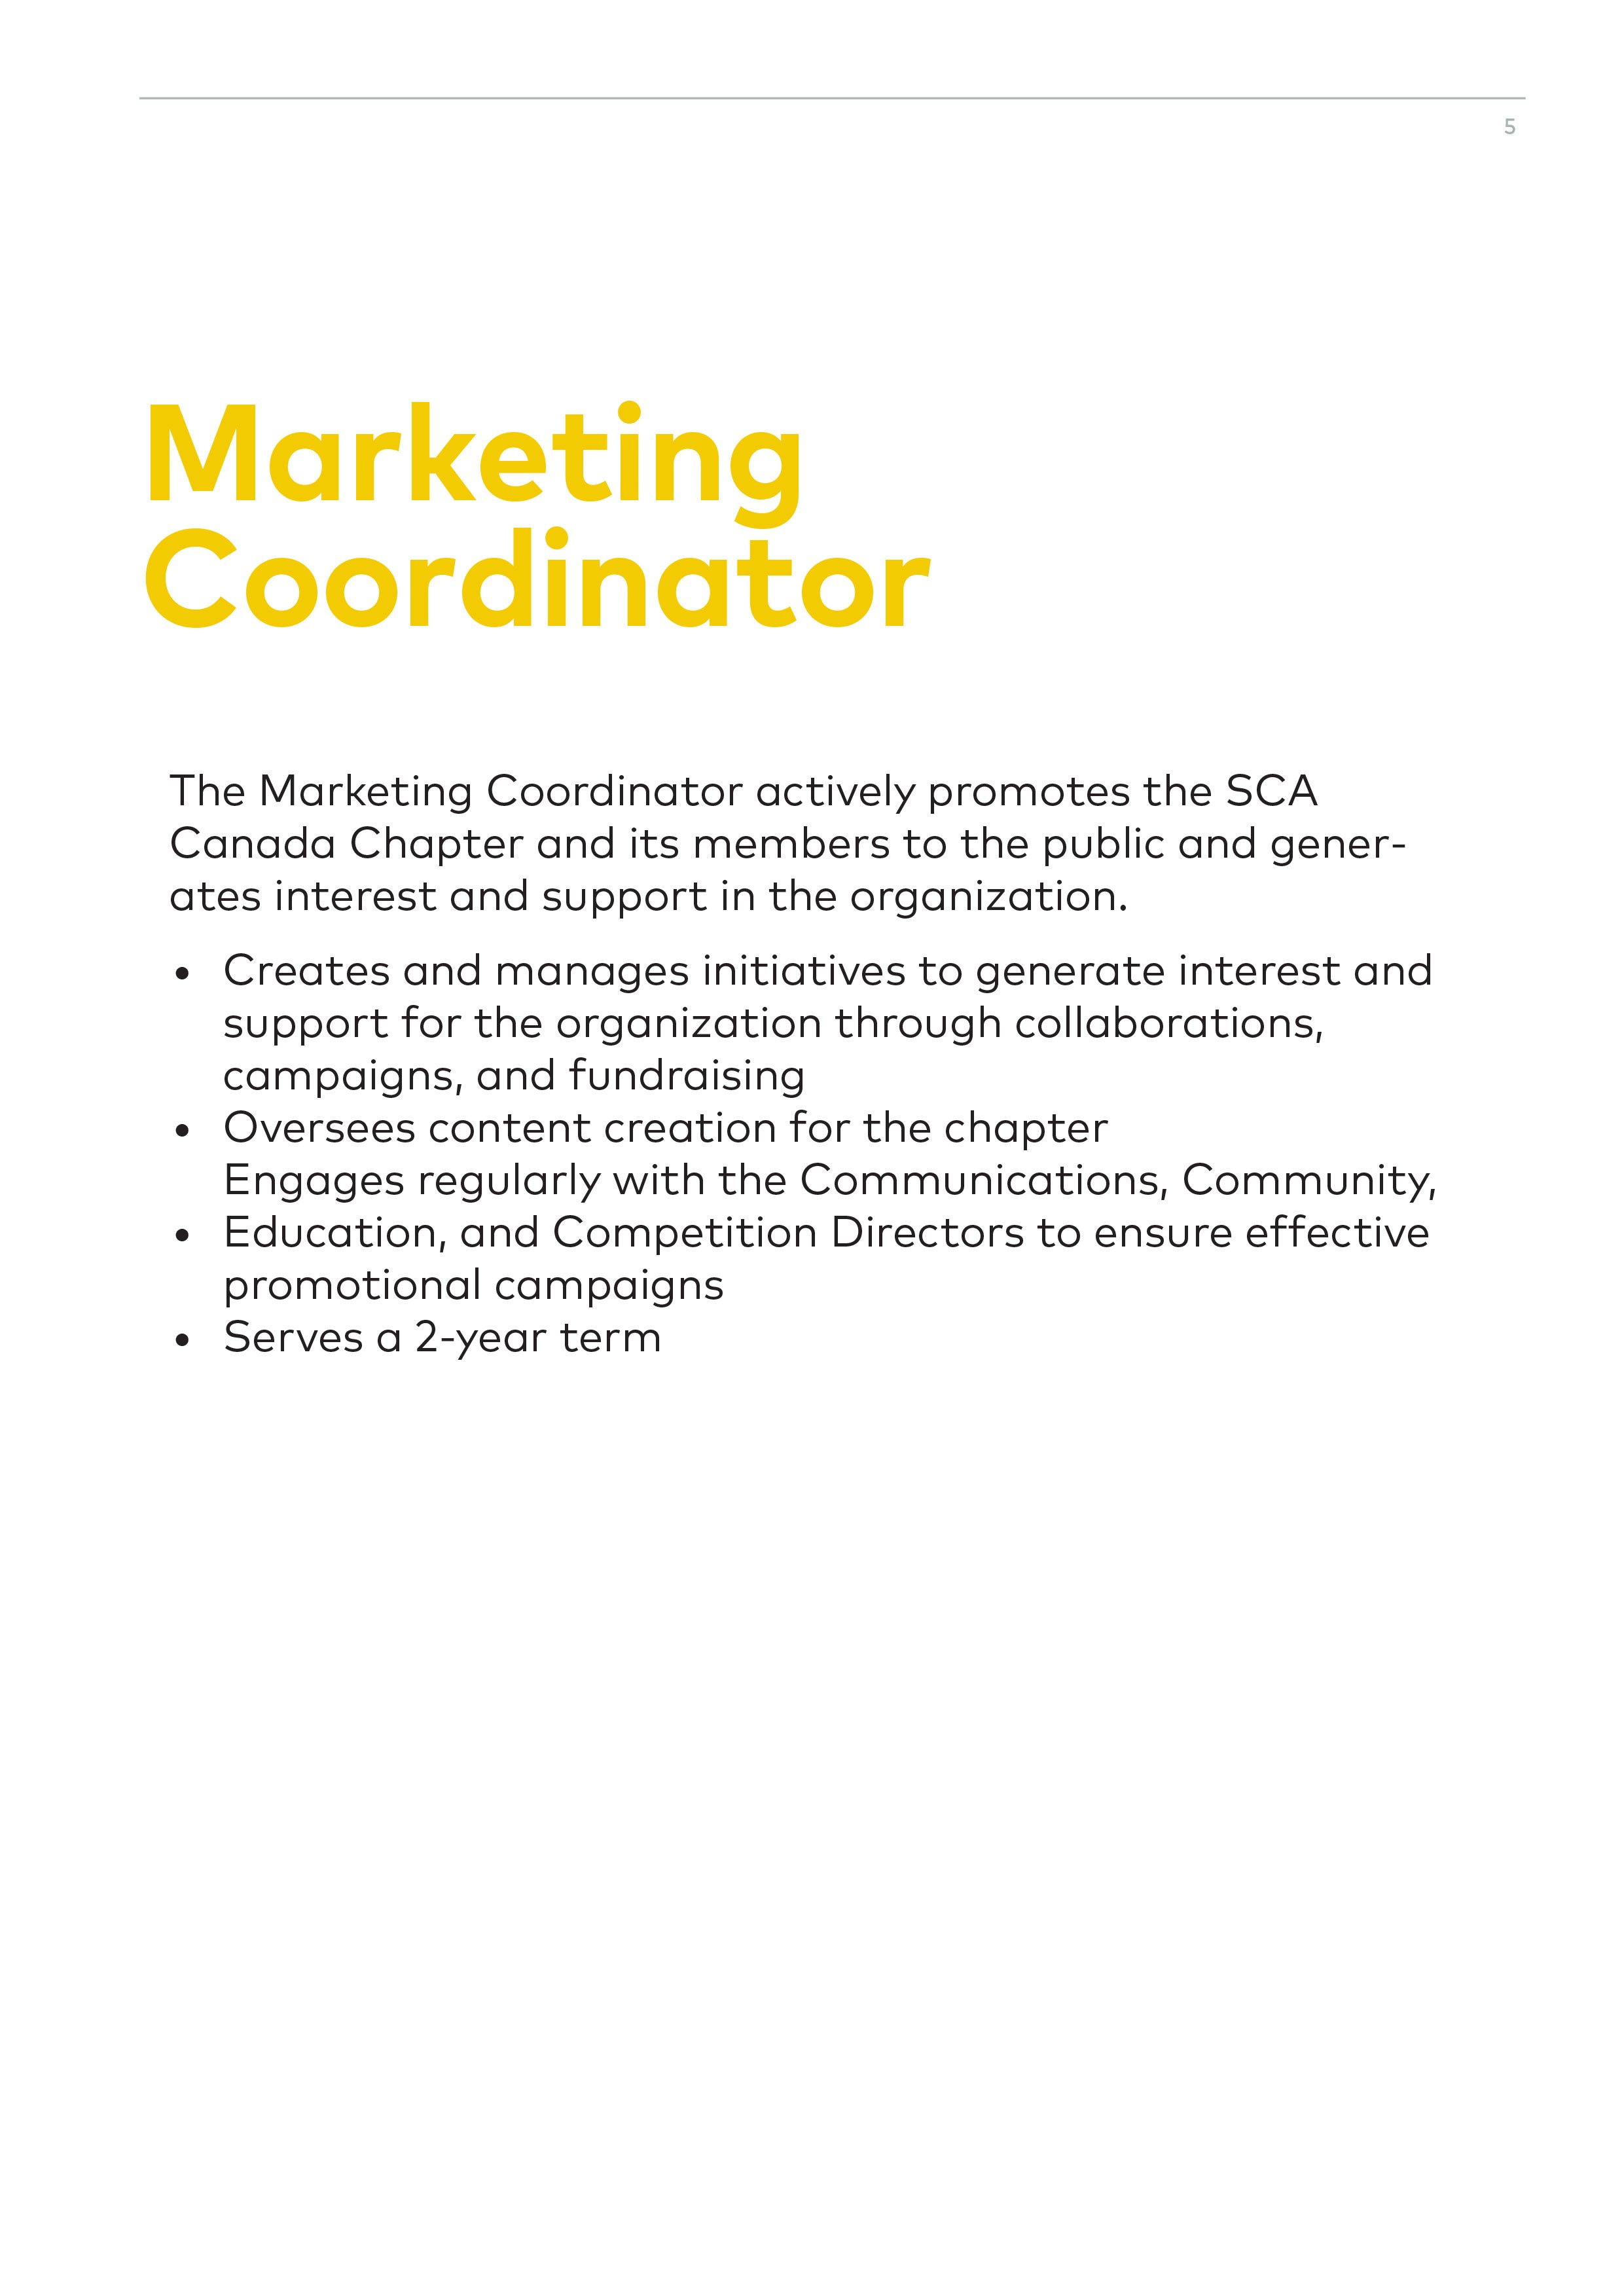 SCA_Canada_Chapter_Roles_Responsibilities_Marketing.jpg